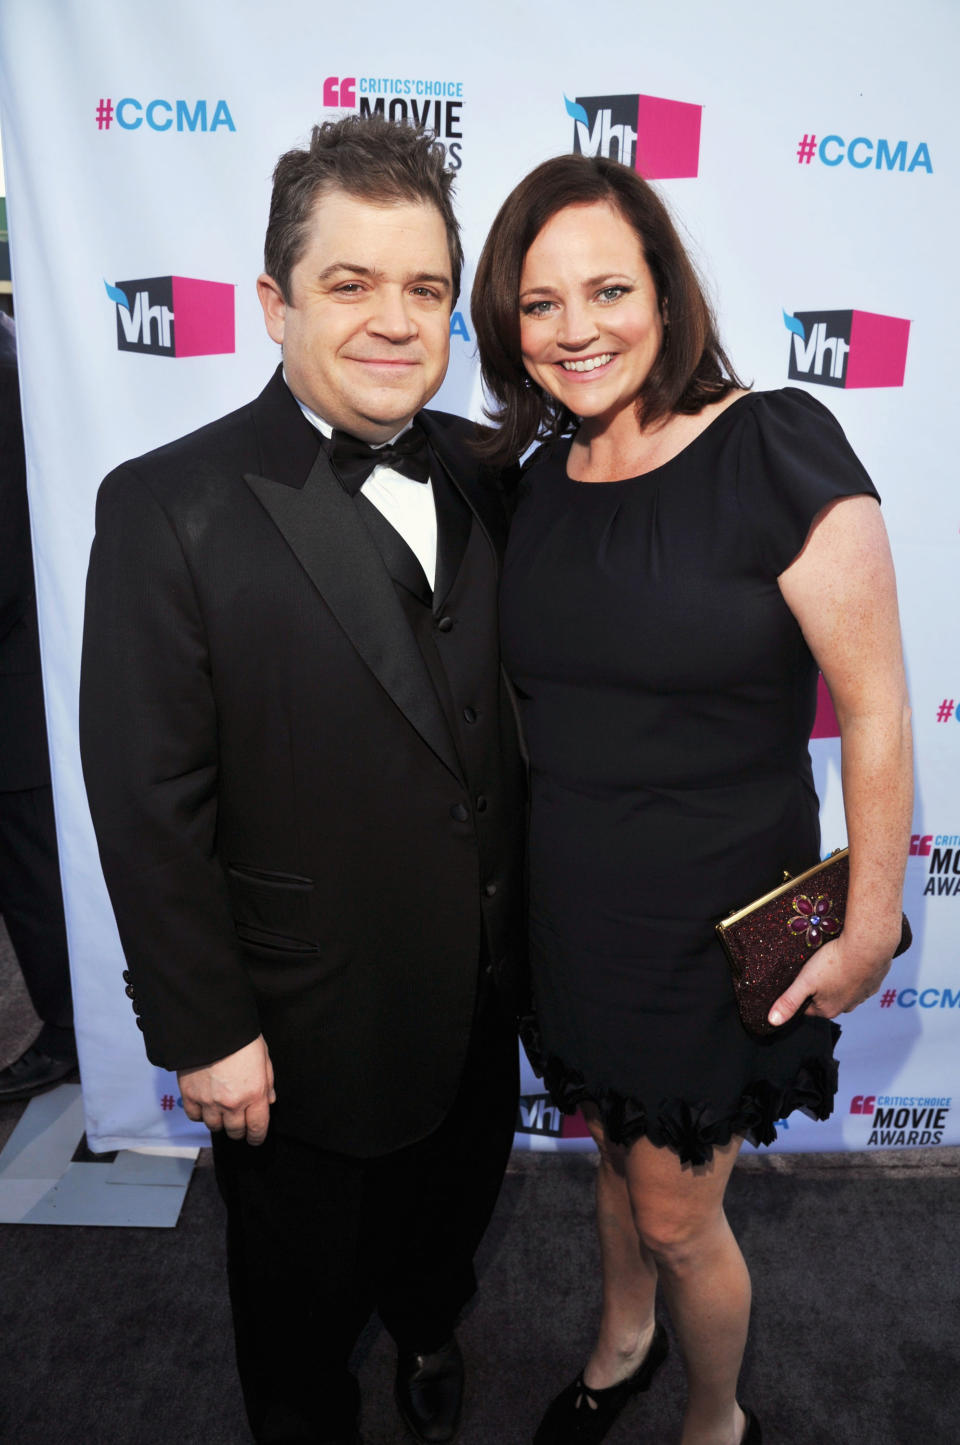 Patton Oswalt and Michelle McNamara attend the 17th Annual Critics’ Choice Movie Awards on Jan. 12, 2012. (Photo: Lester Cohen/WireImage)